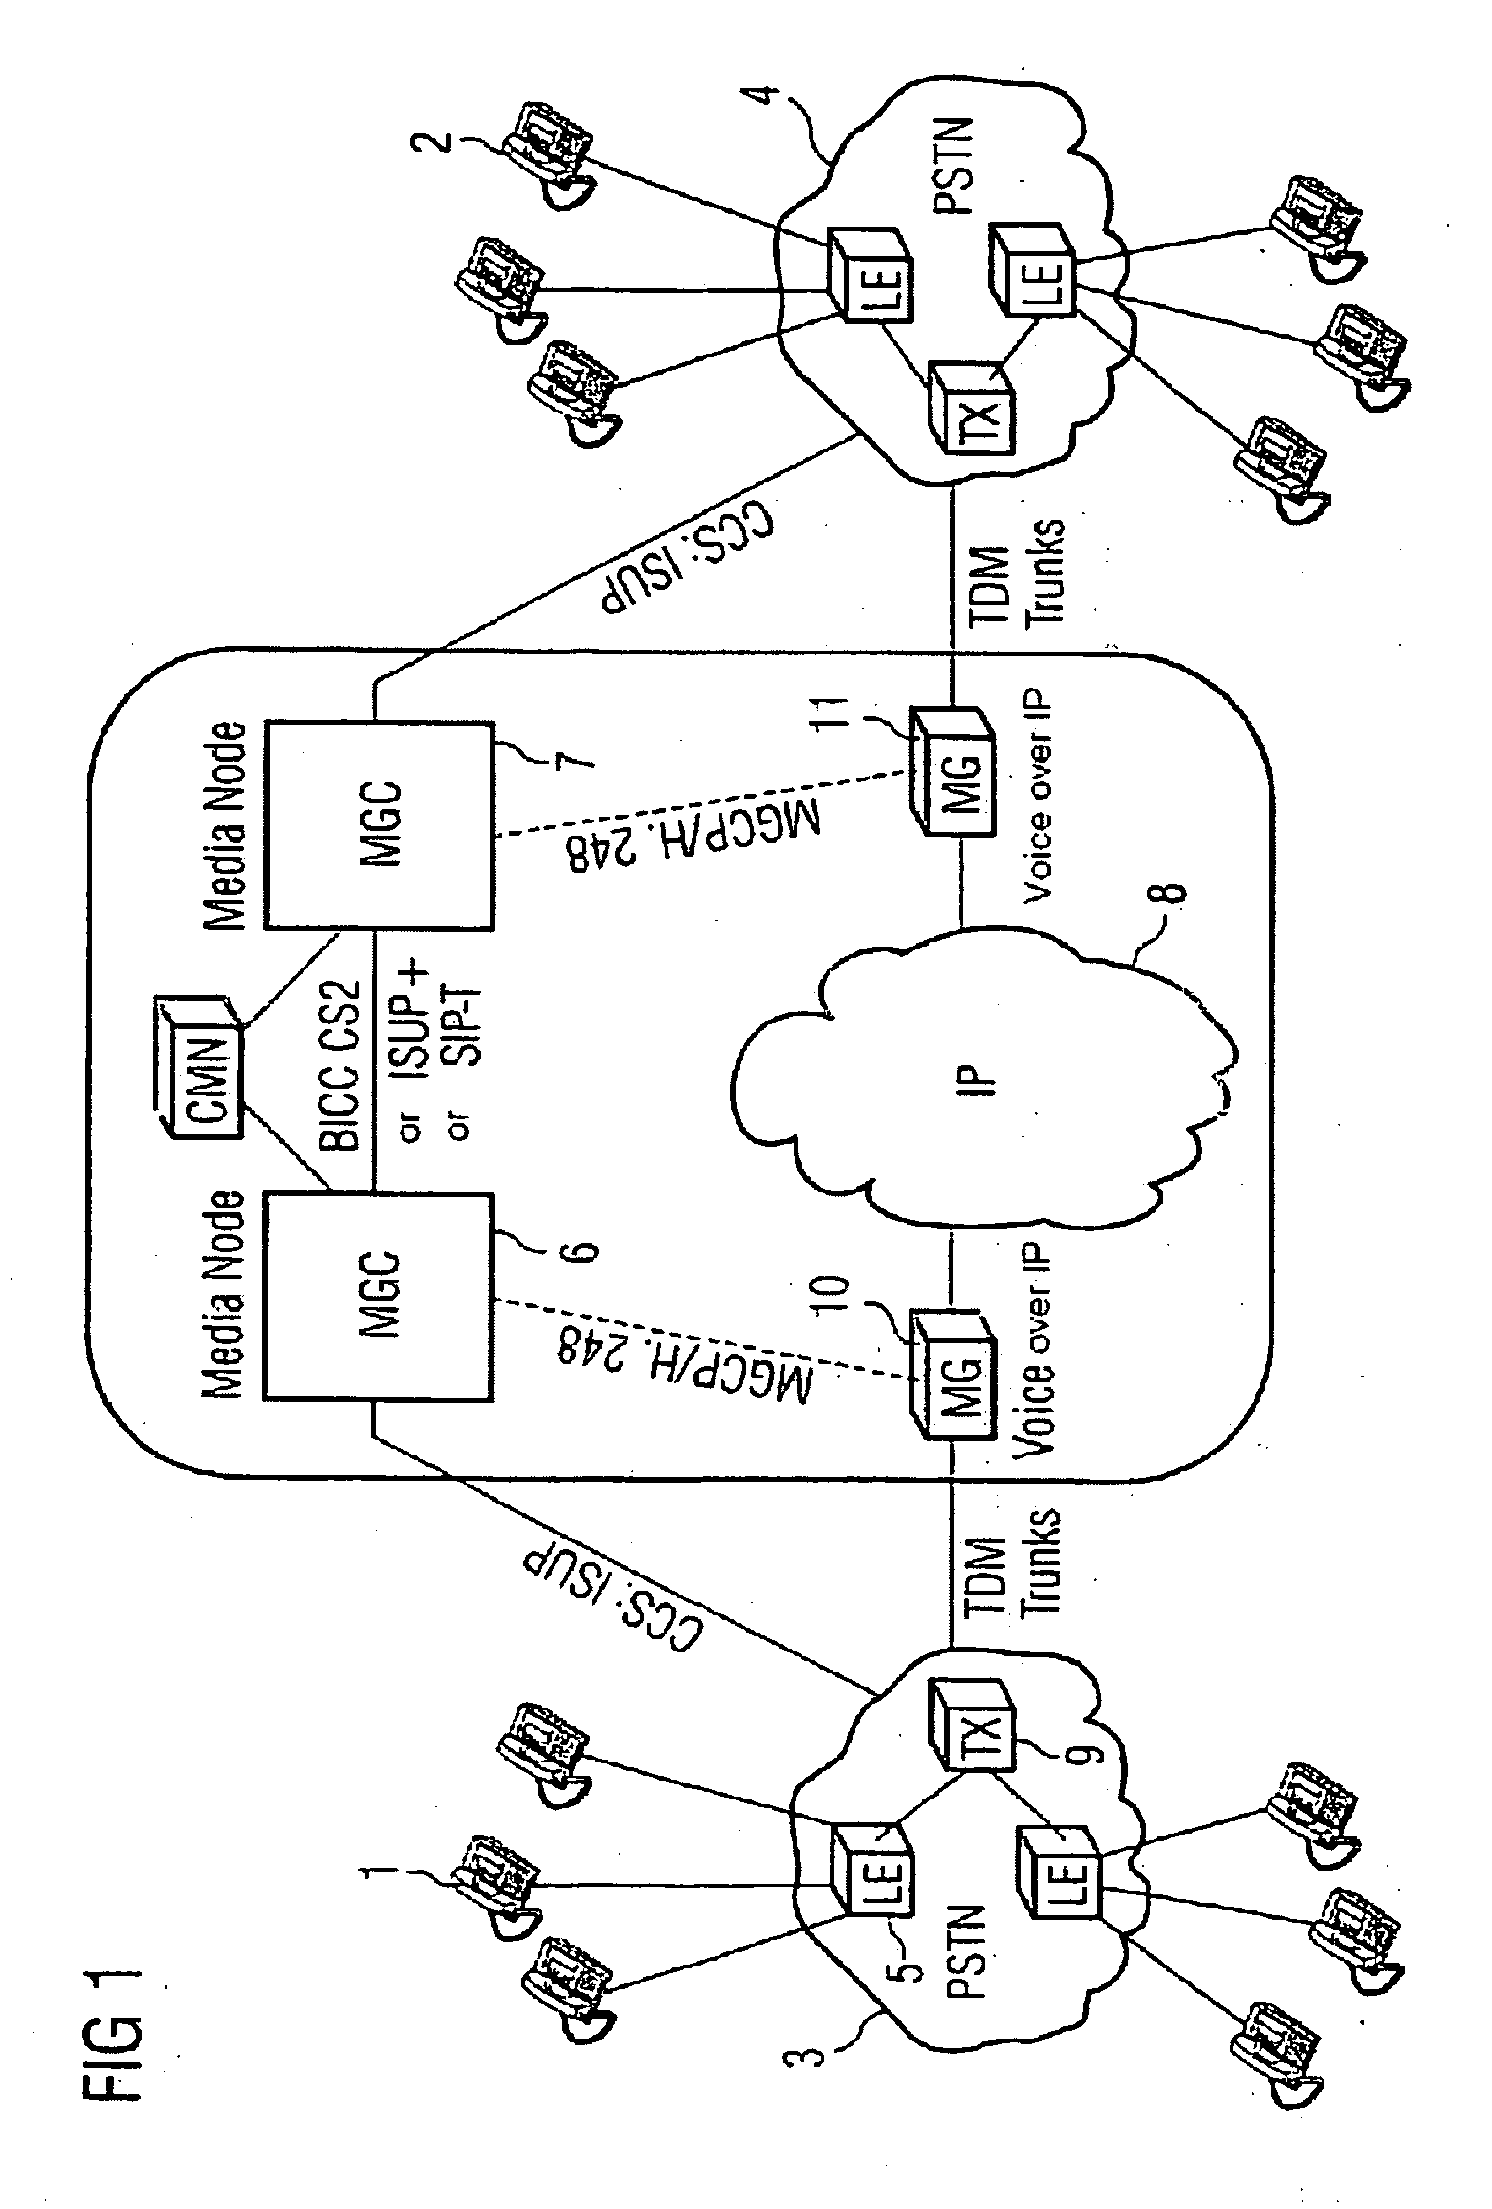 Method for providing a user interaction dialogue (uid) prior to connection acceptance by the called user